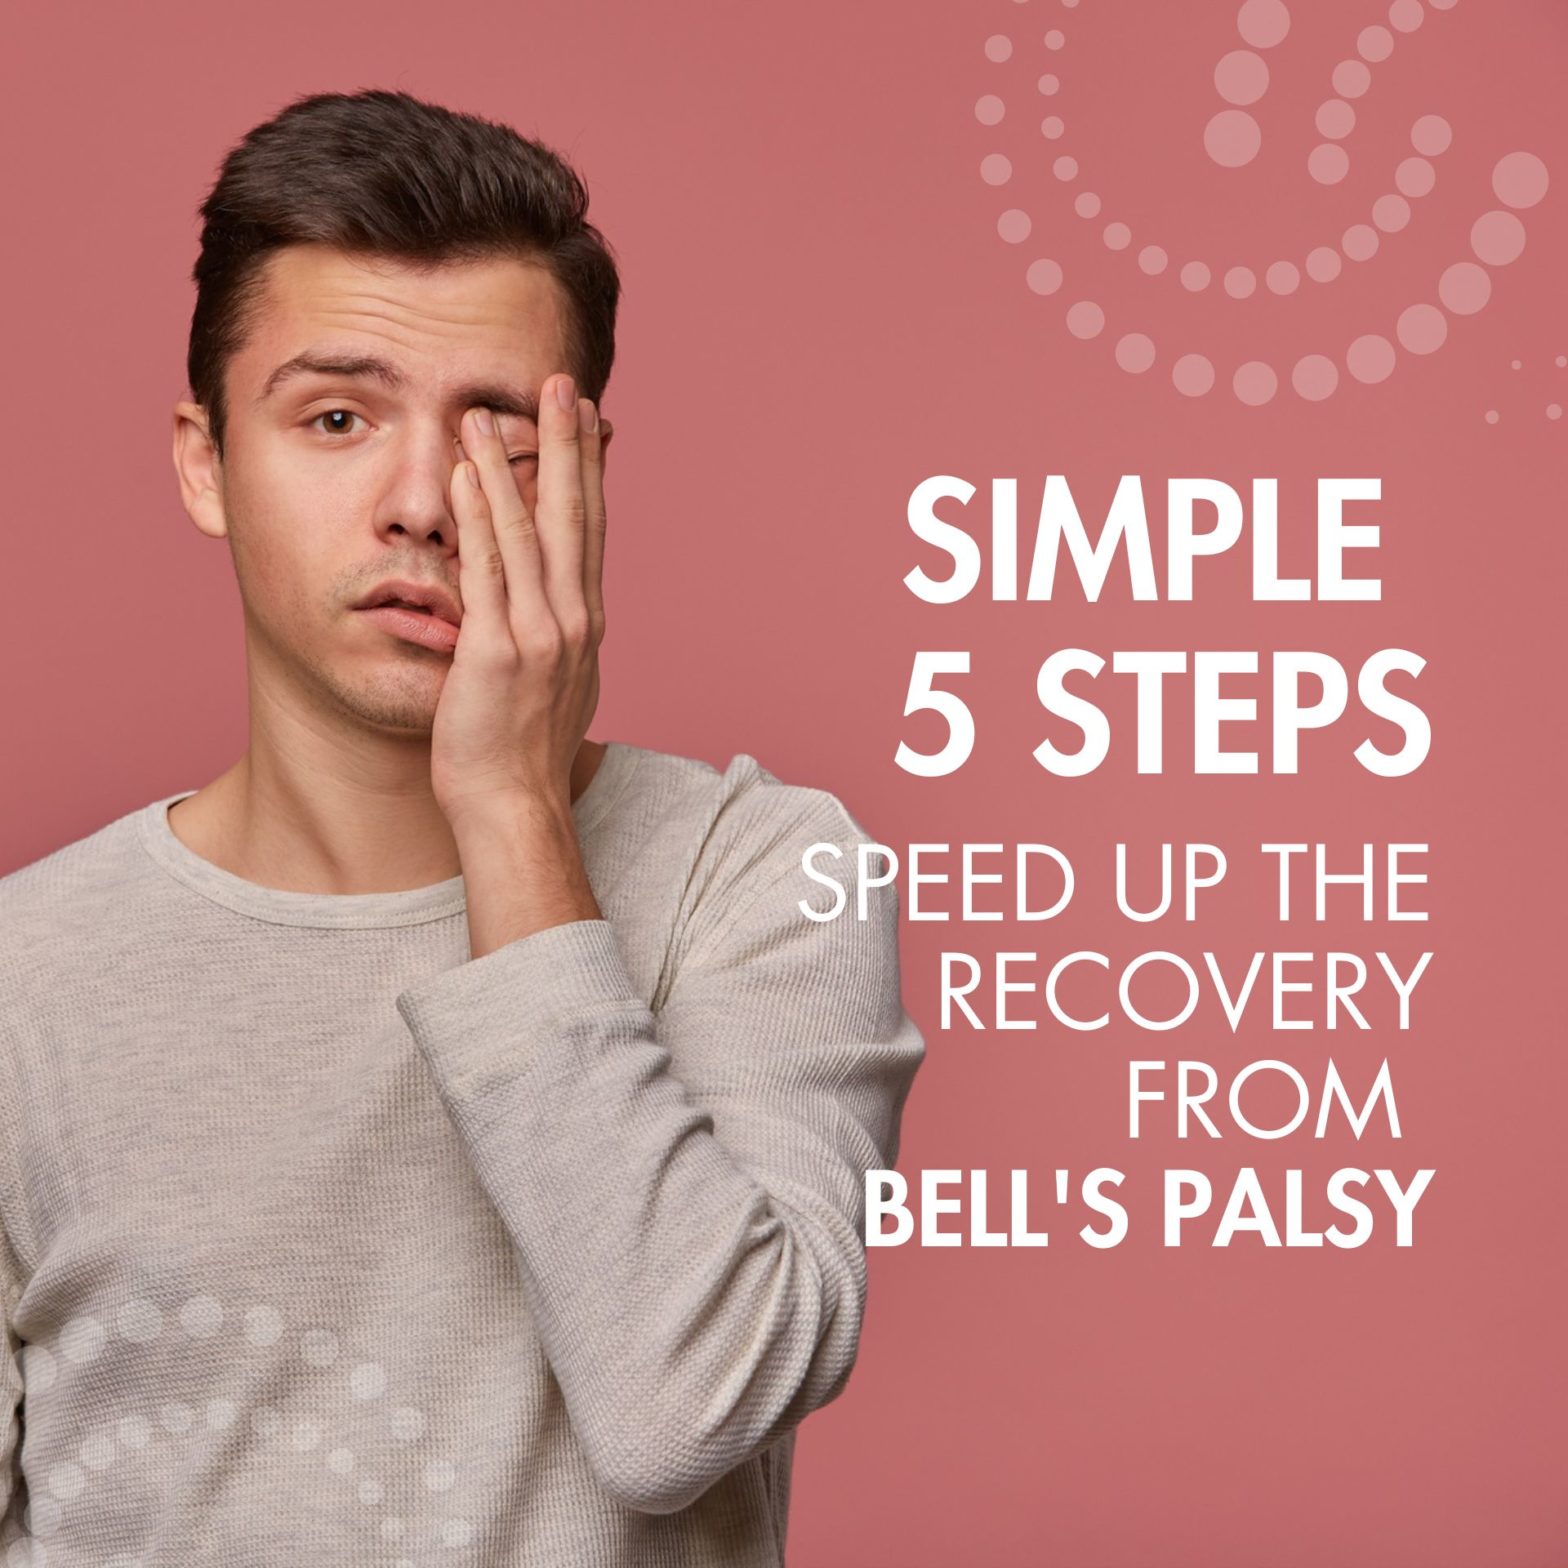 5 Steps to speed up the recovery from bell's palsy